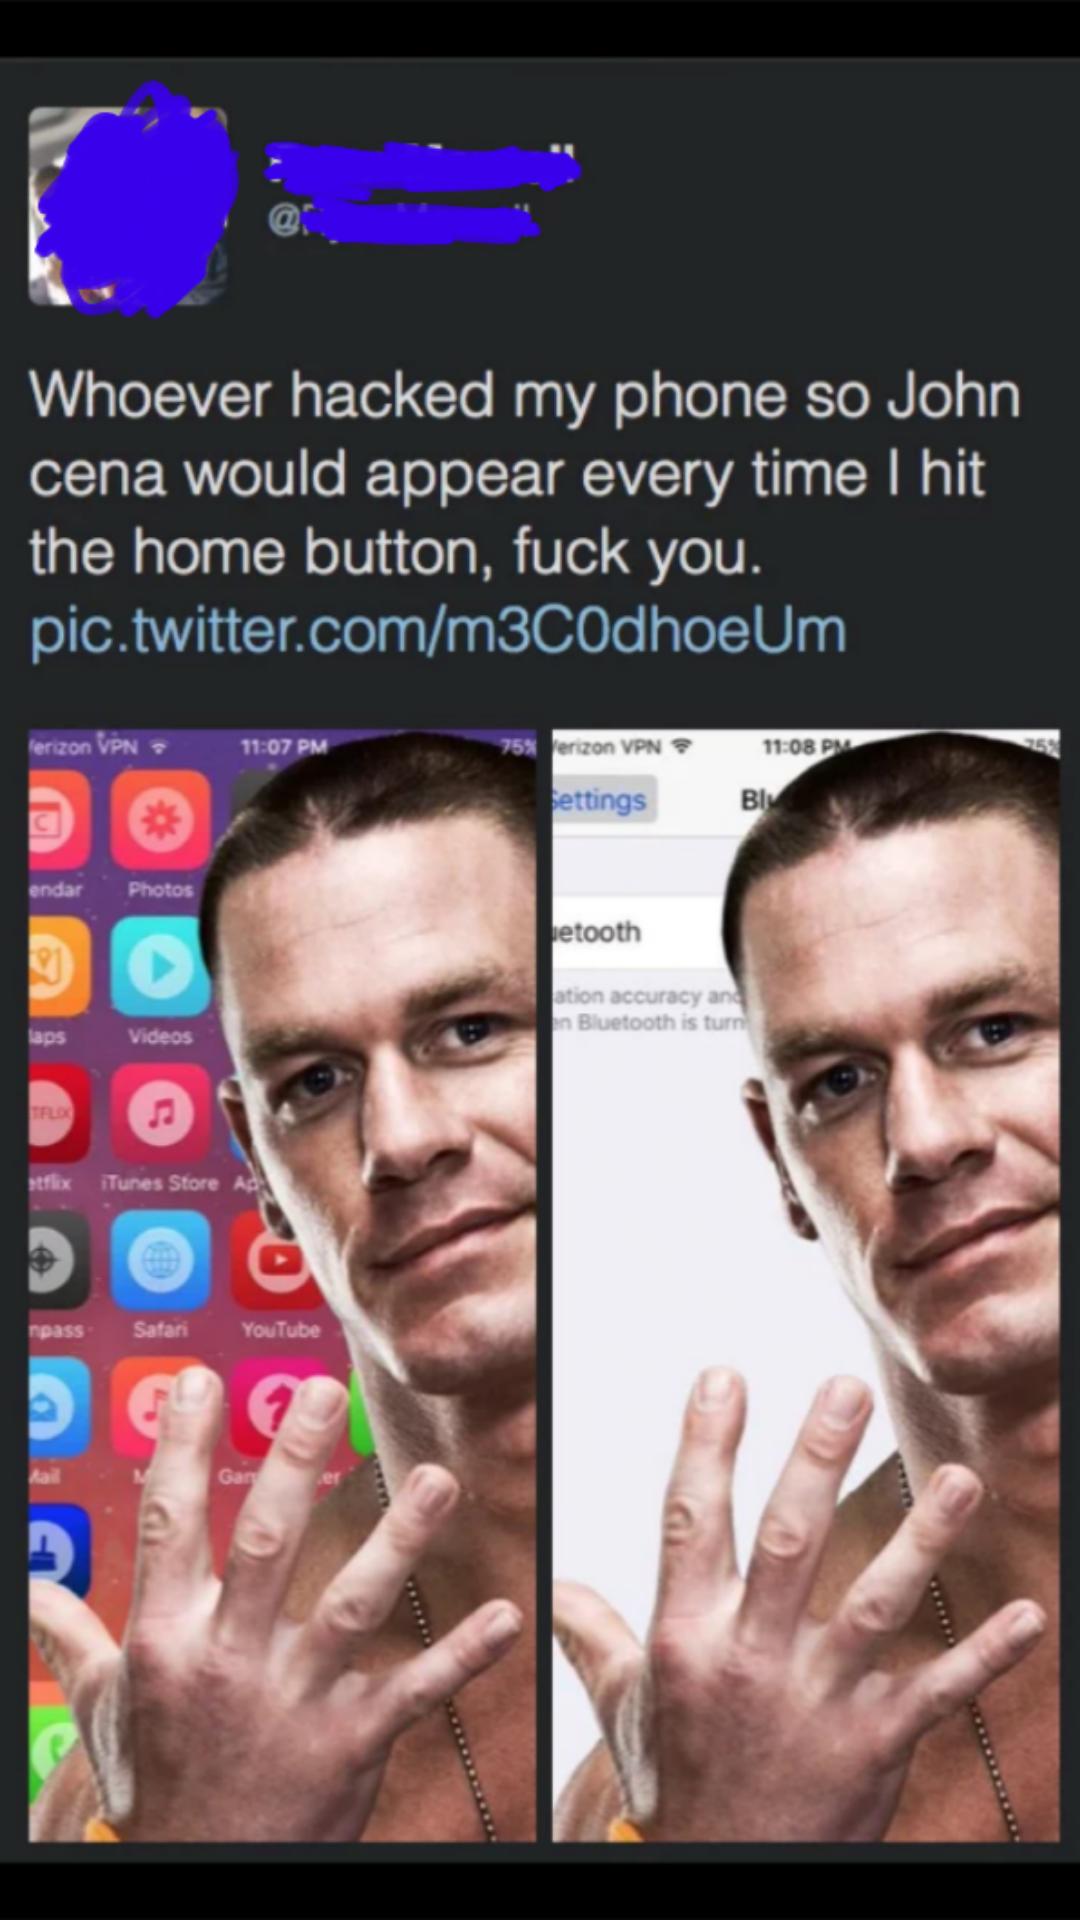 john cena - Whoever hacked my phone so John cena would appear every time I hit the home button, fuck you. pic.twitter.comm3C0dhoeUm terizon Vpn 75% erizon Vpn Settings Bi endar Photos betooth ation accuracy and In Bluetooth is turn laps Videos Hflex iTune